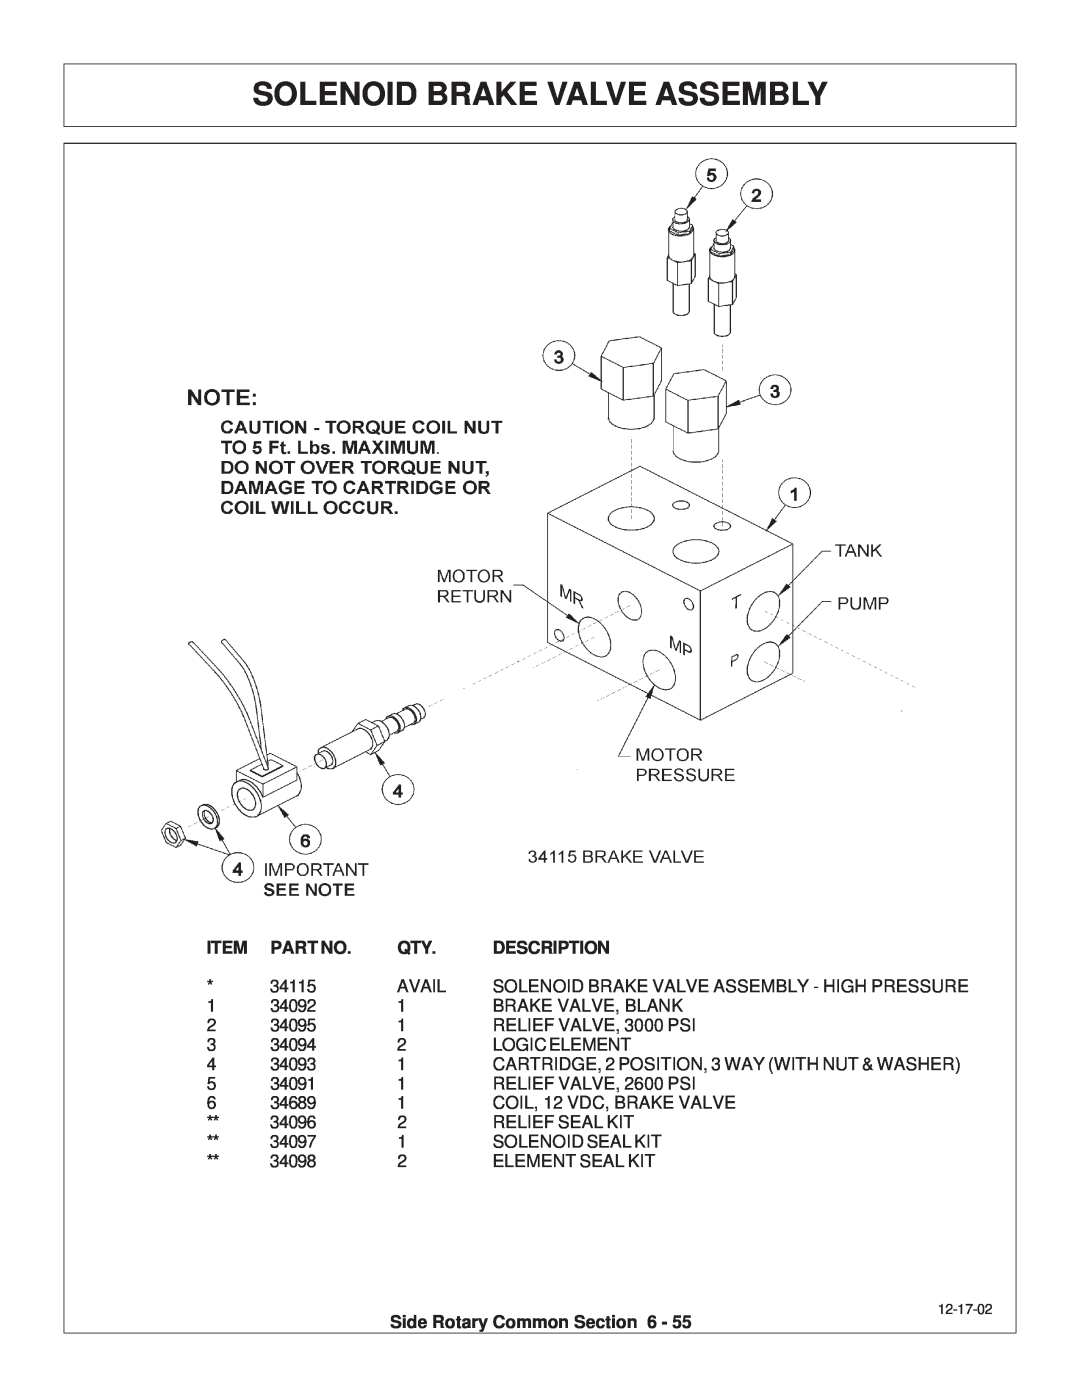 Tiger Products Co., Ltd TS 100A manual Solenoid Brake Valve Assembly, Description, Side Rotary Common 